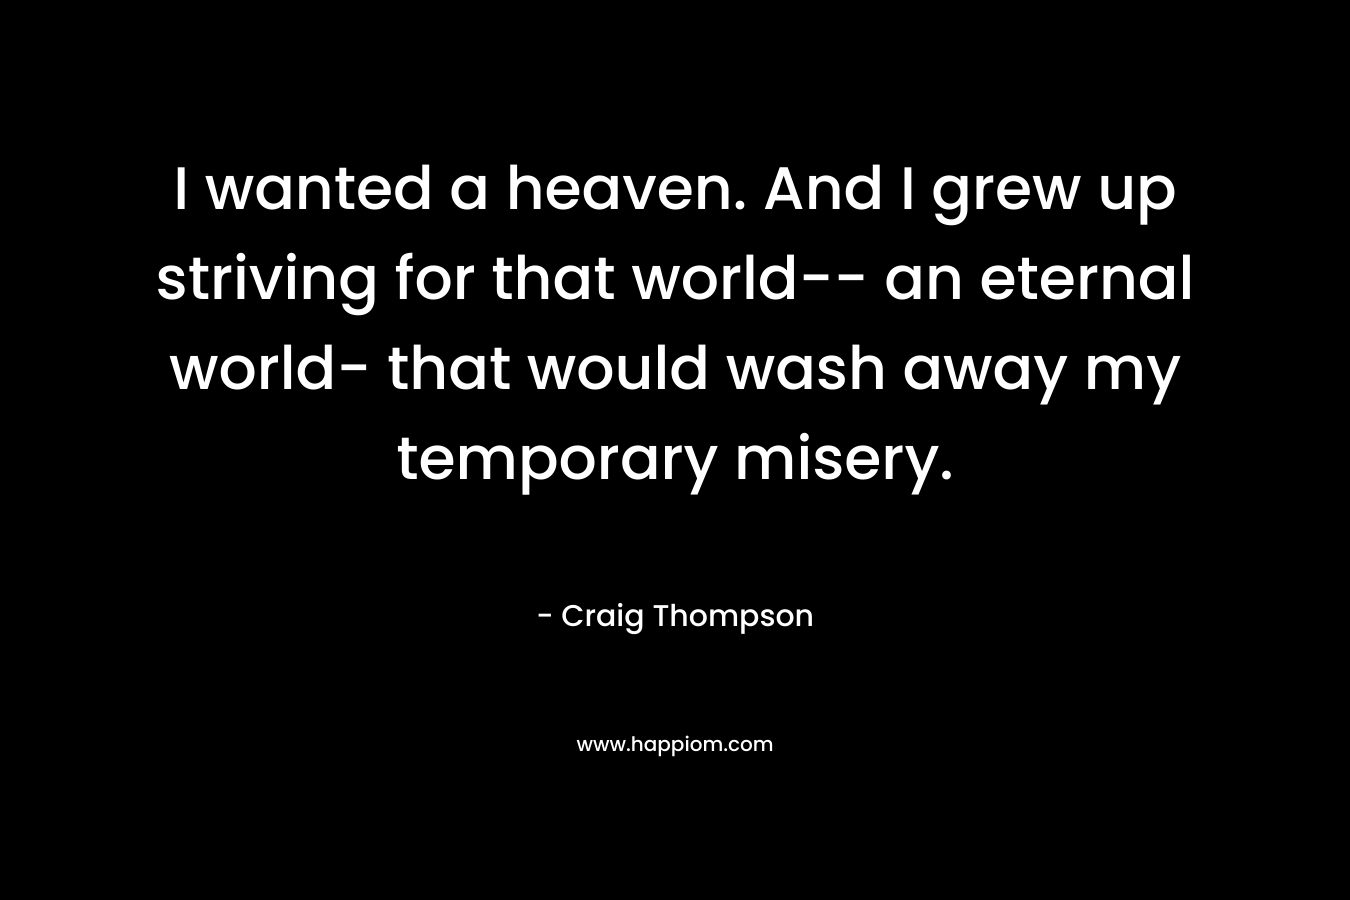 I wanted a heaven. And I grew up striving for that world– an eternal world- that would wash away my temporary misery. – Craig Thompson